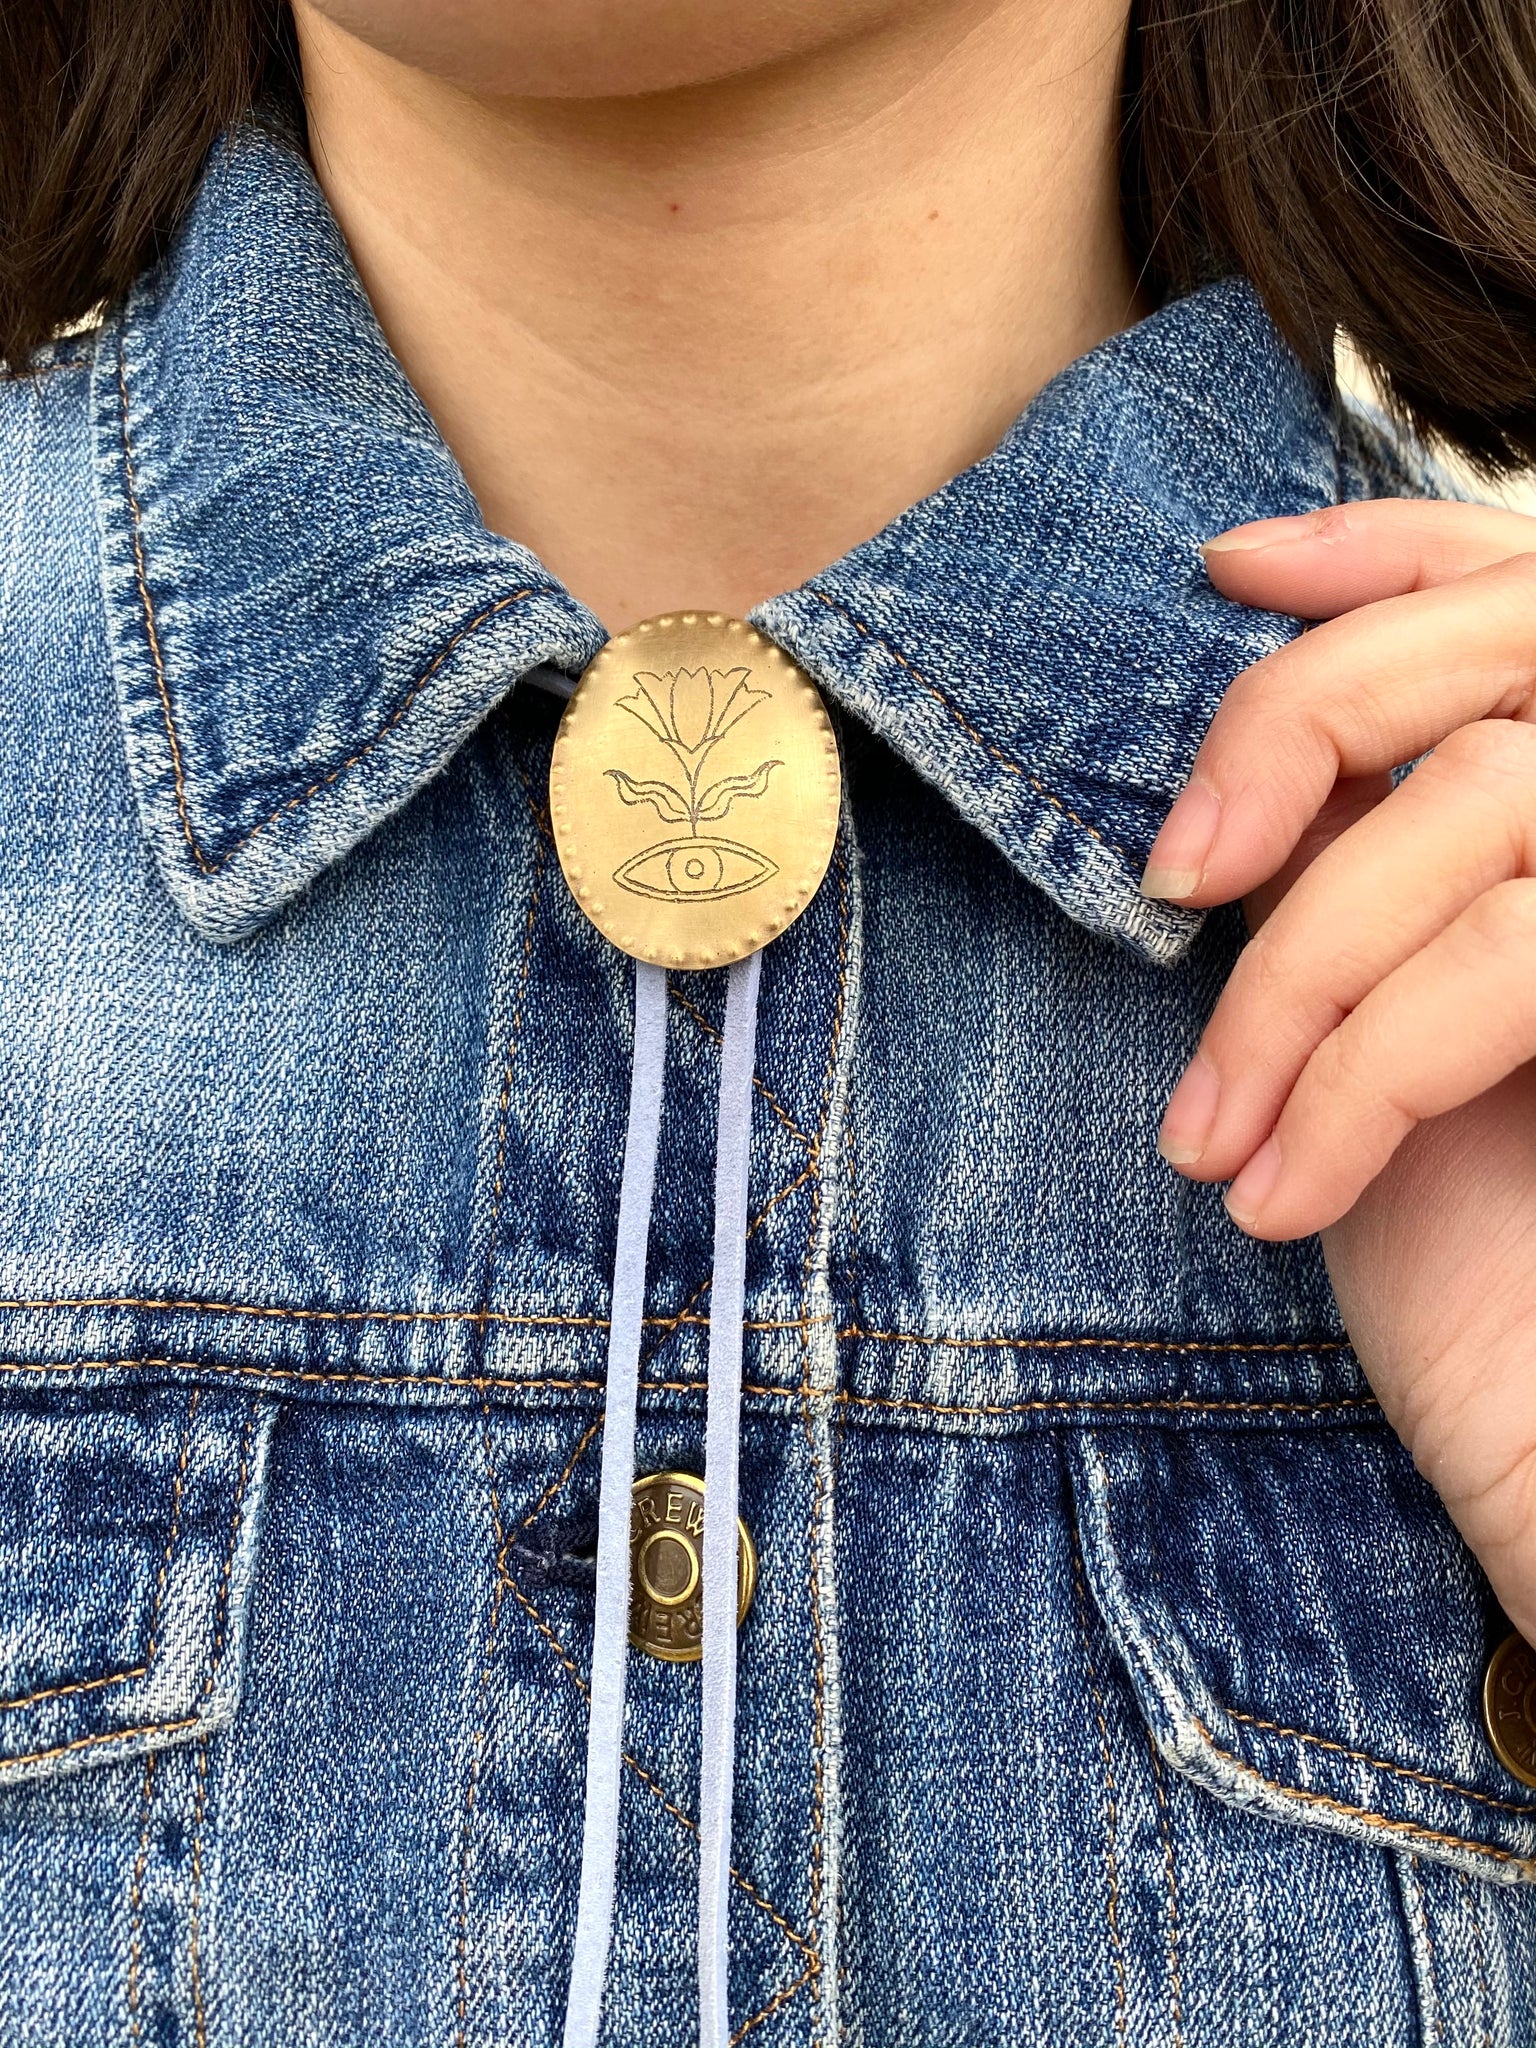 Claire Sommers Buck x Fort Lonesome DREAMLAND Bolo Tie